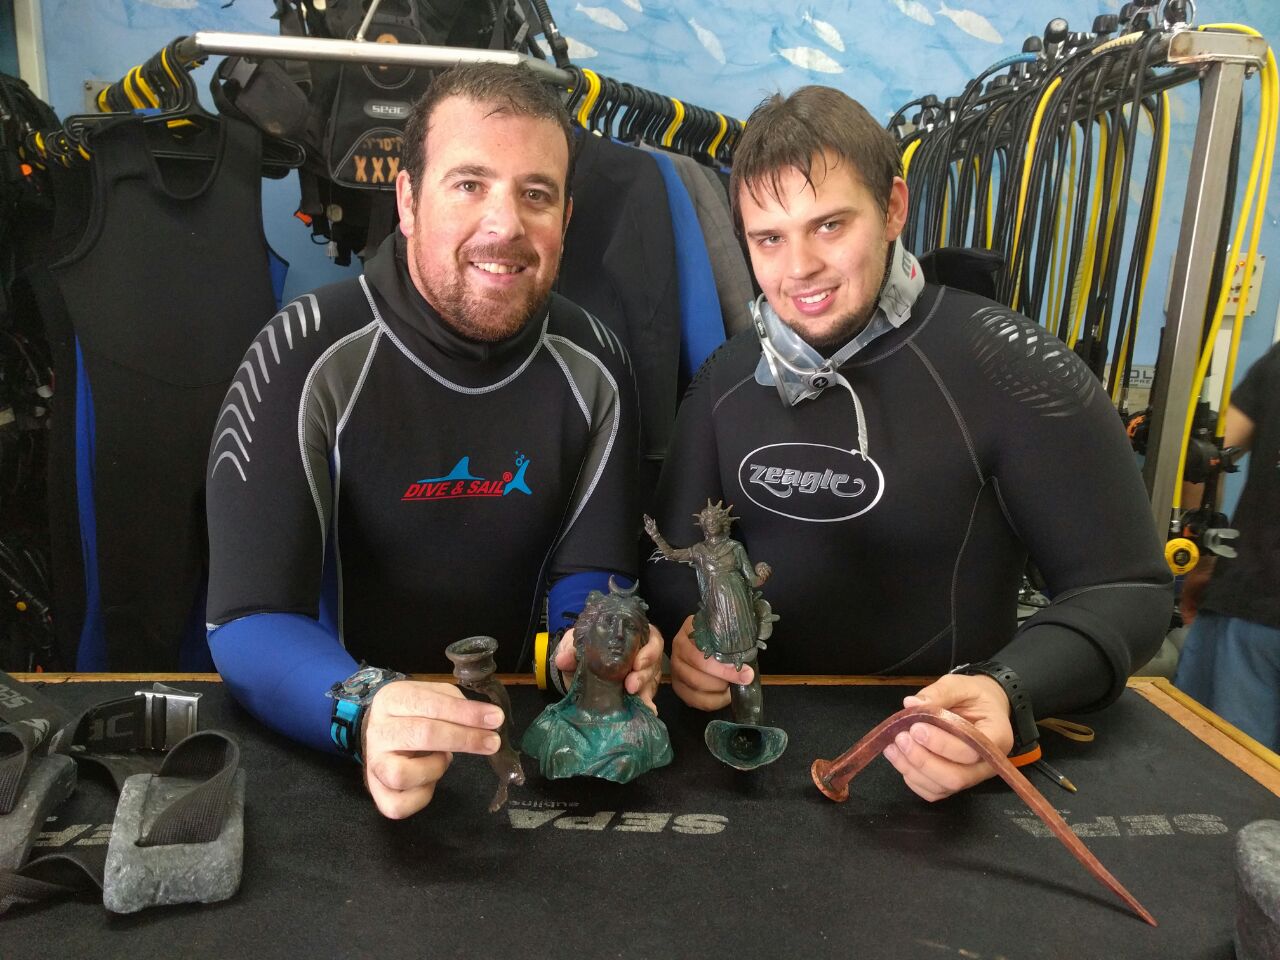 Exemplary citizenship: Divers Ran Feinstein (right) and Ofer Ra‘anan after the discovery. Photo courtesy of the Old Caesarea Diving Center